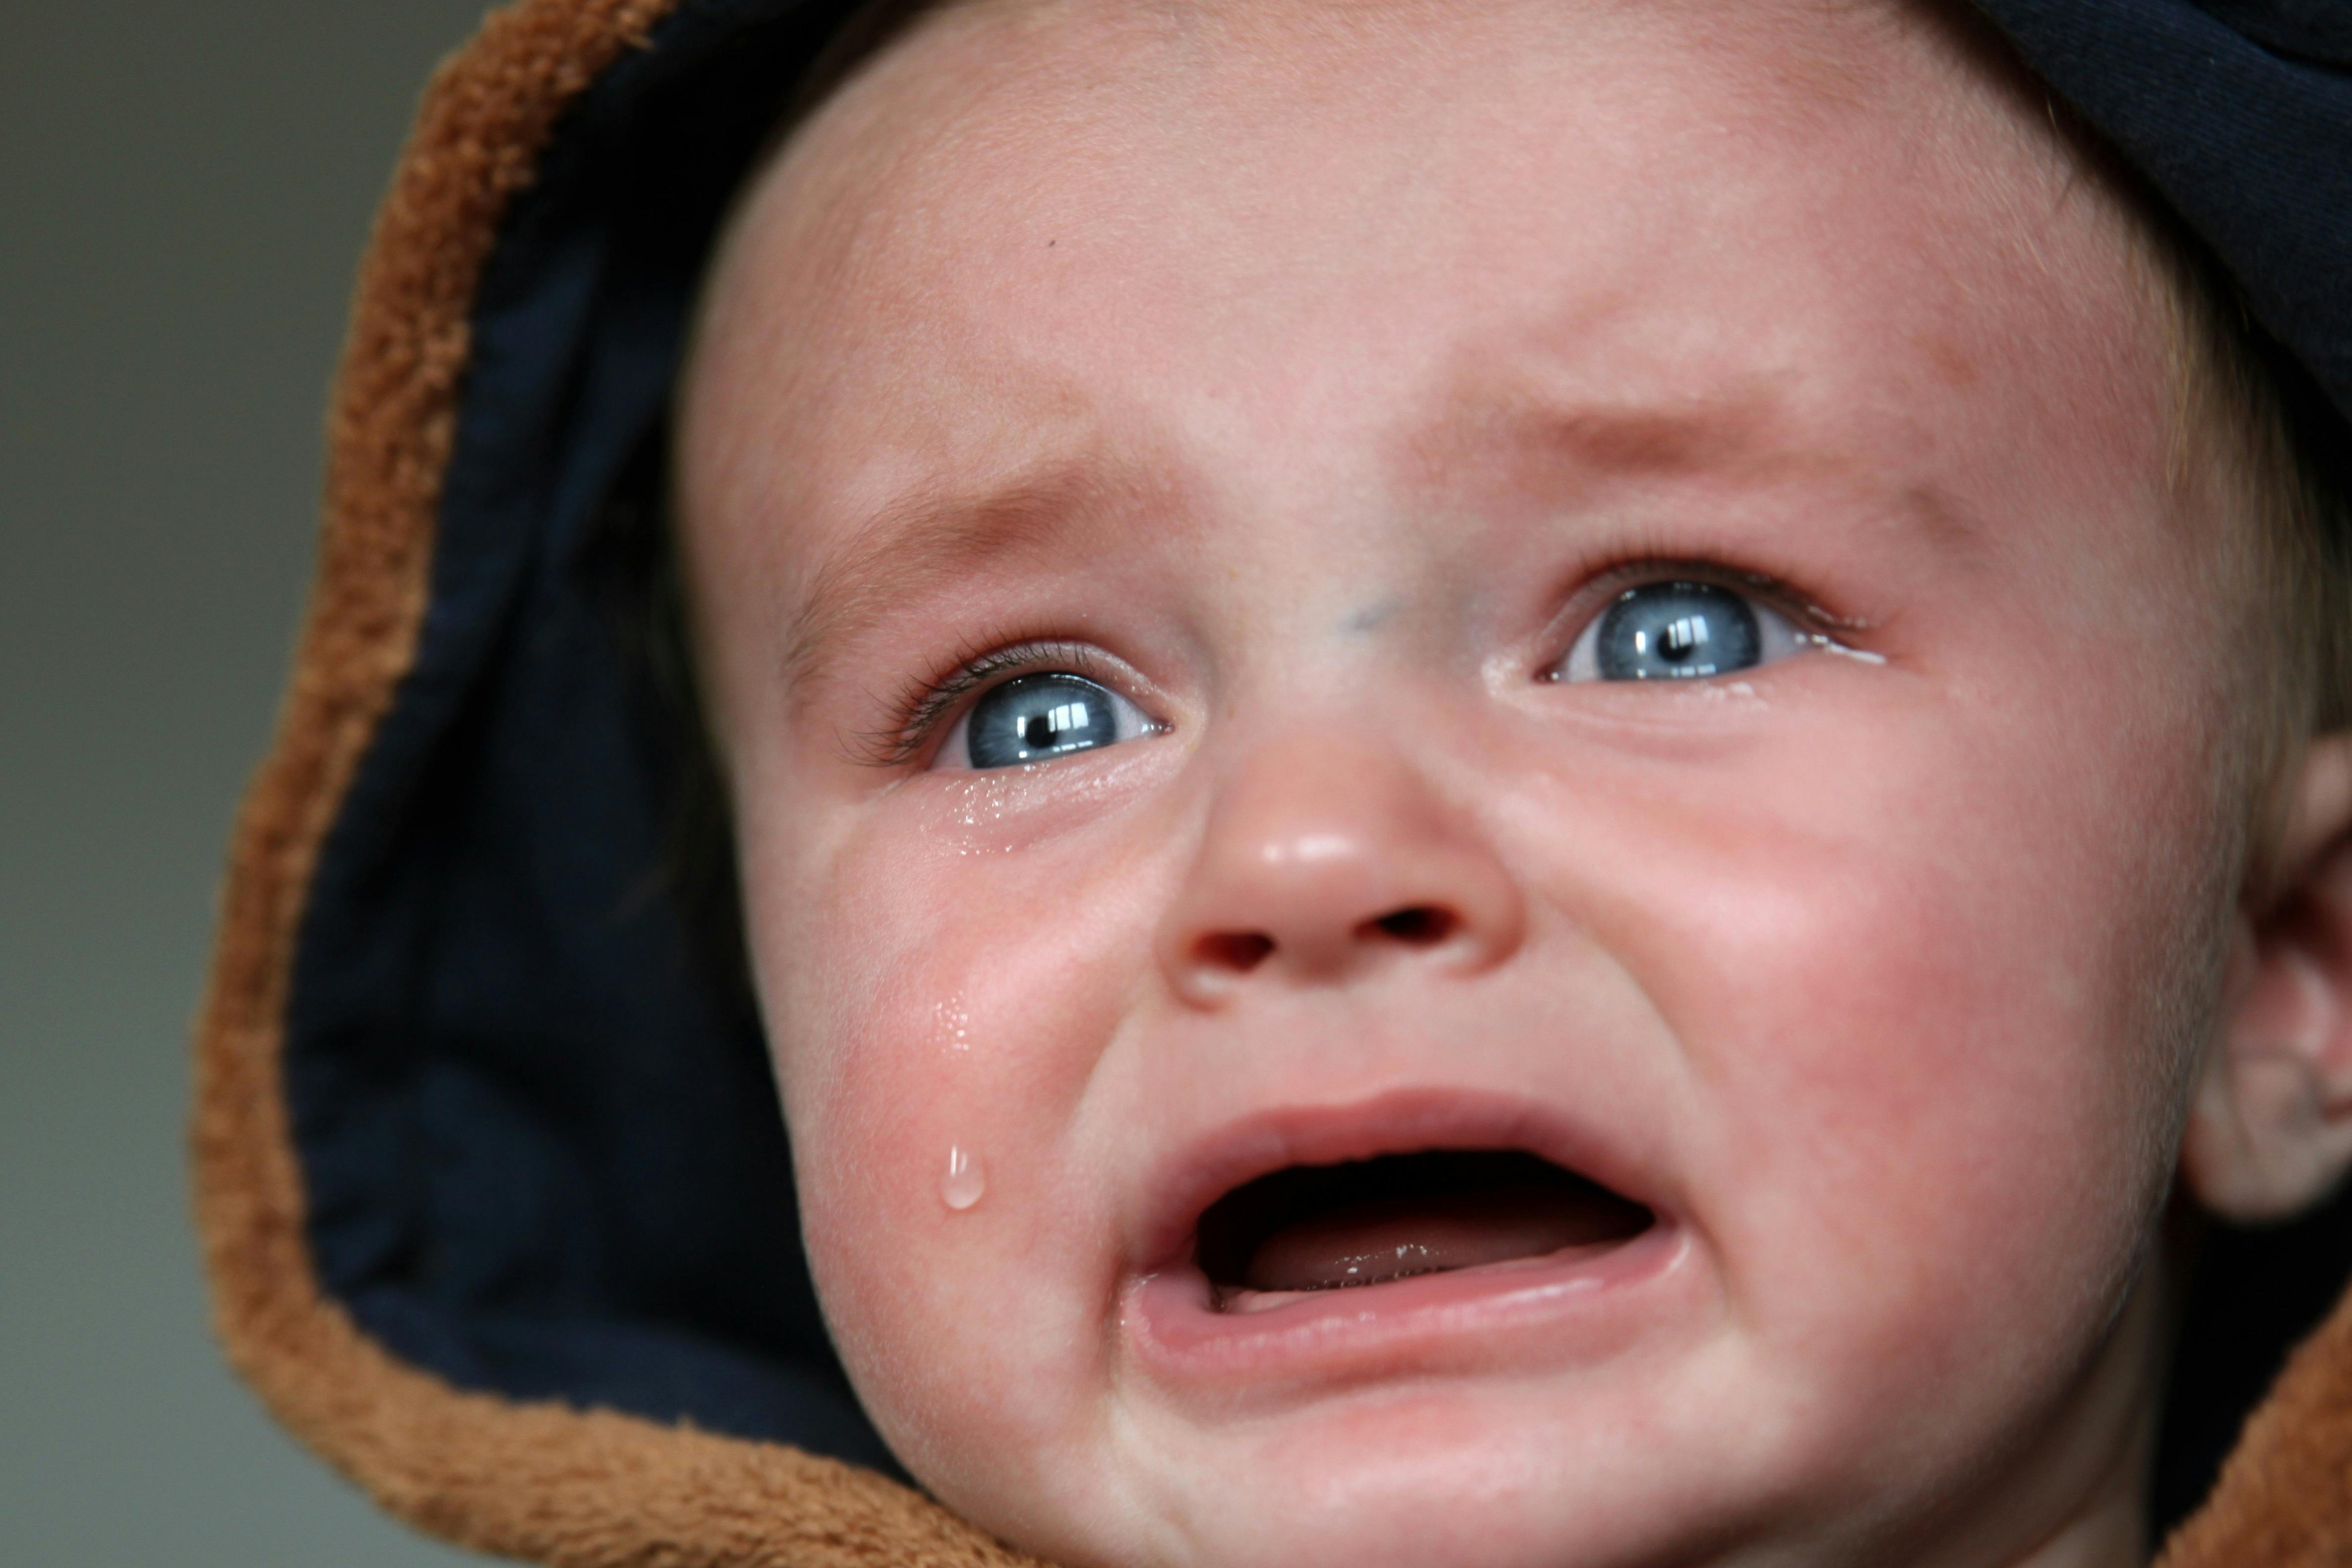 Letting your baby cry yes-or-no